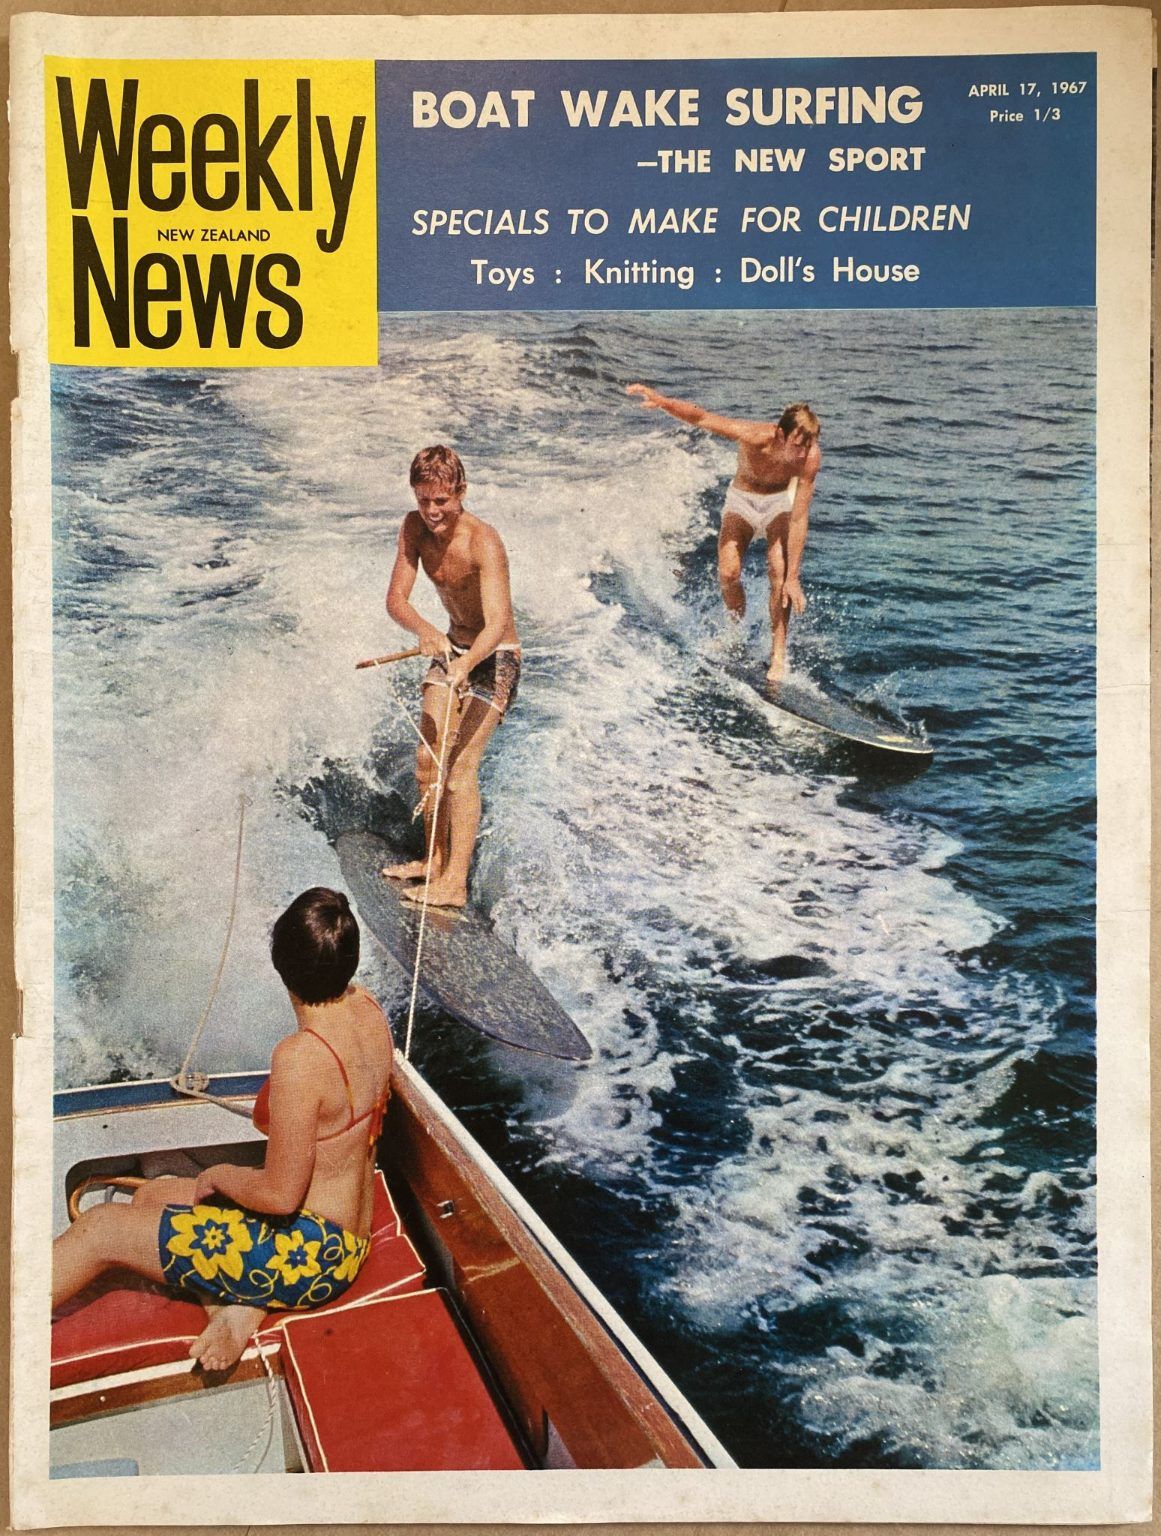 OLD NEWSPAPER: New Zealand Weekly News, No. 5394, 17 April 1967